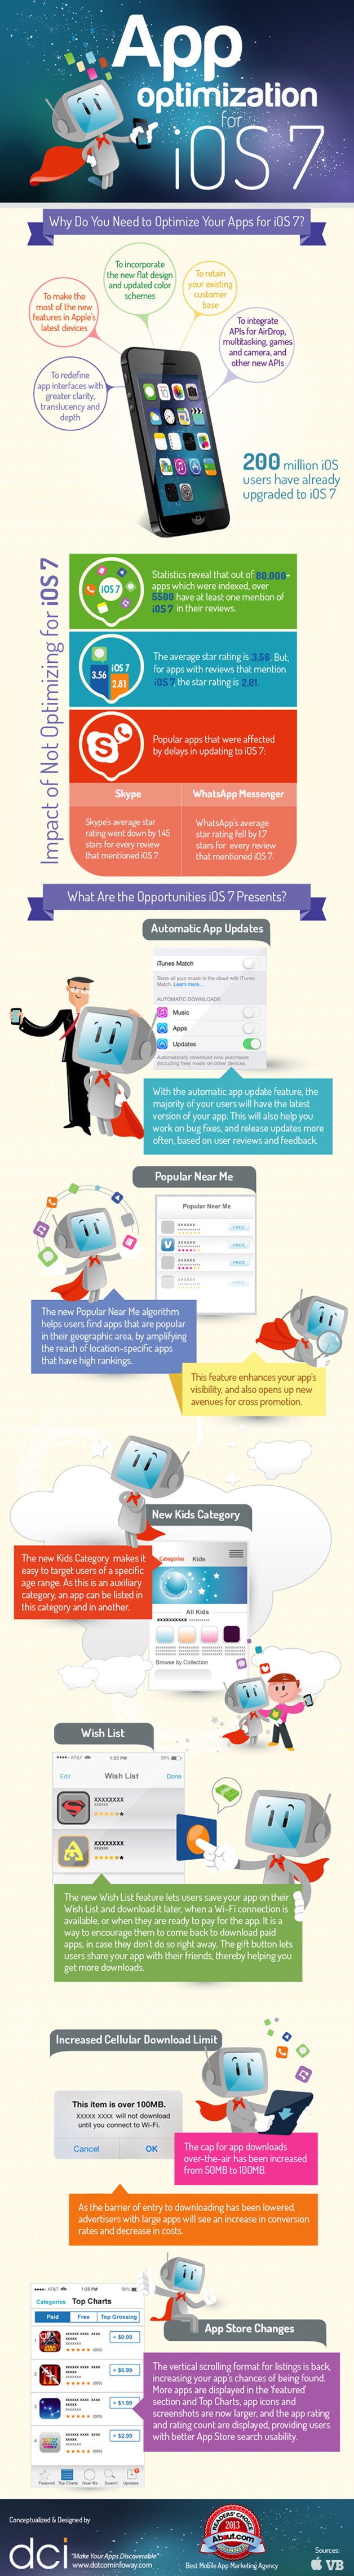 infographic-app-optimization-for-ios7